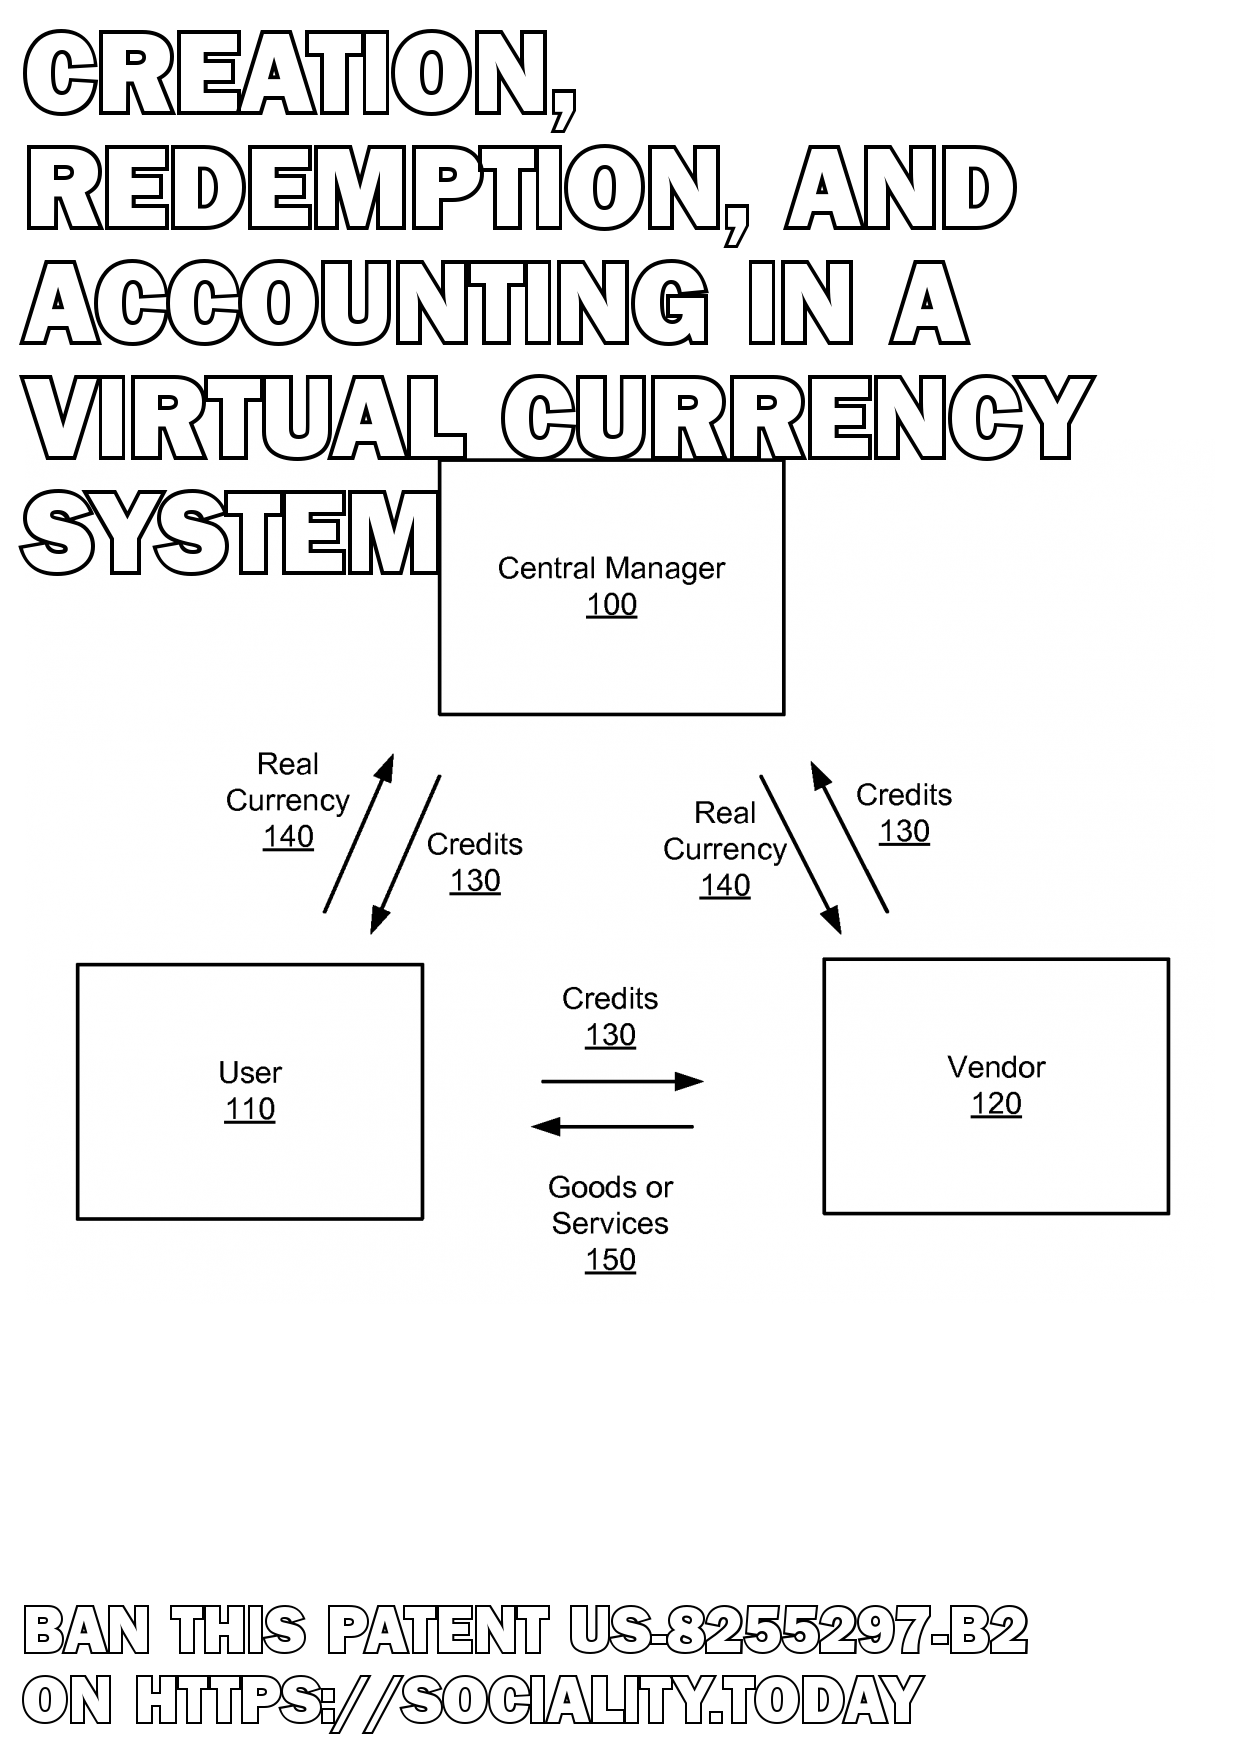 Creation, redemption, and accounting in a virtual currency system  - US-8255297-B2